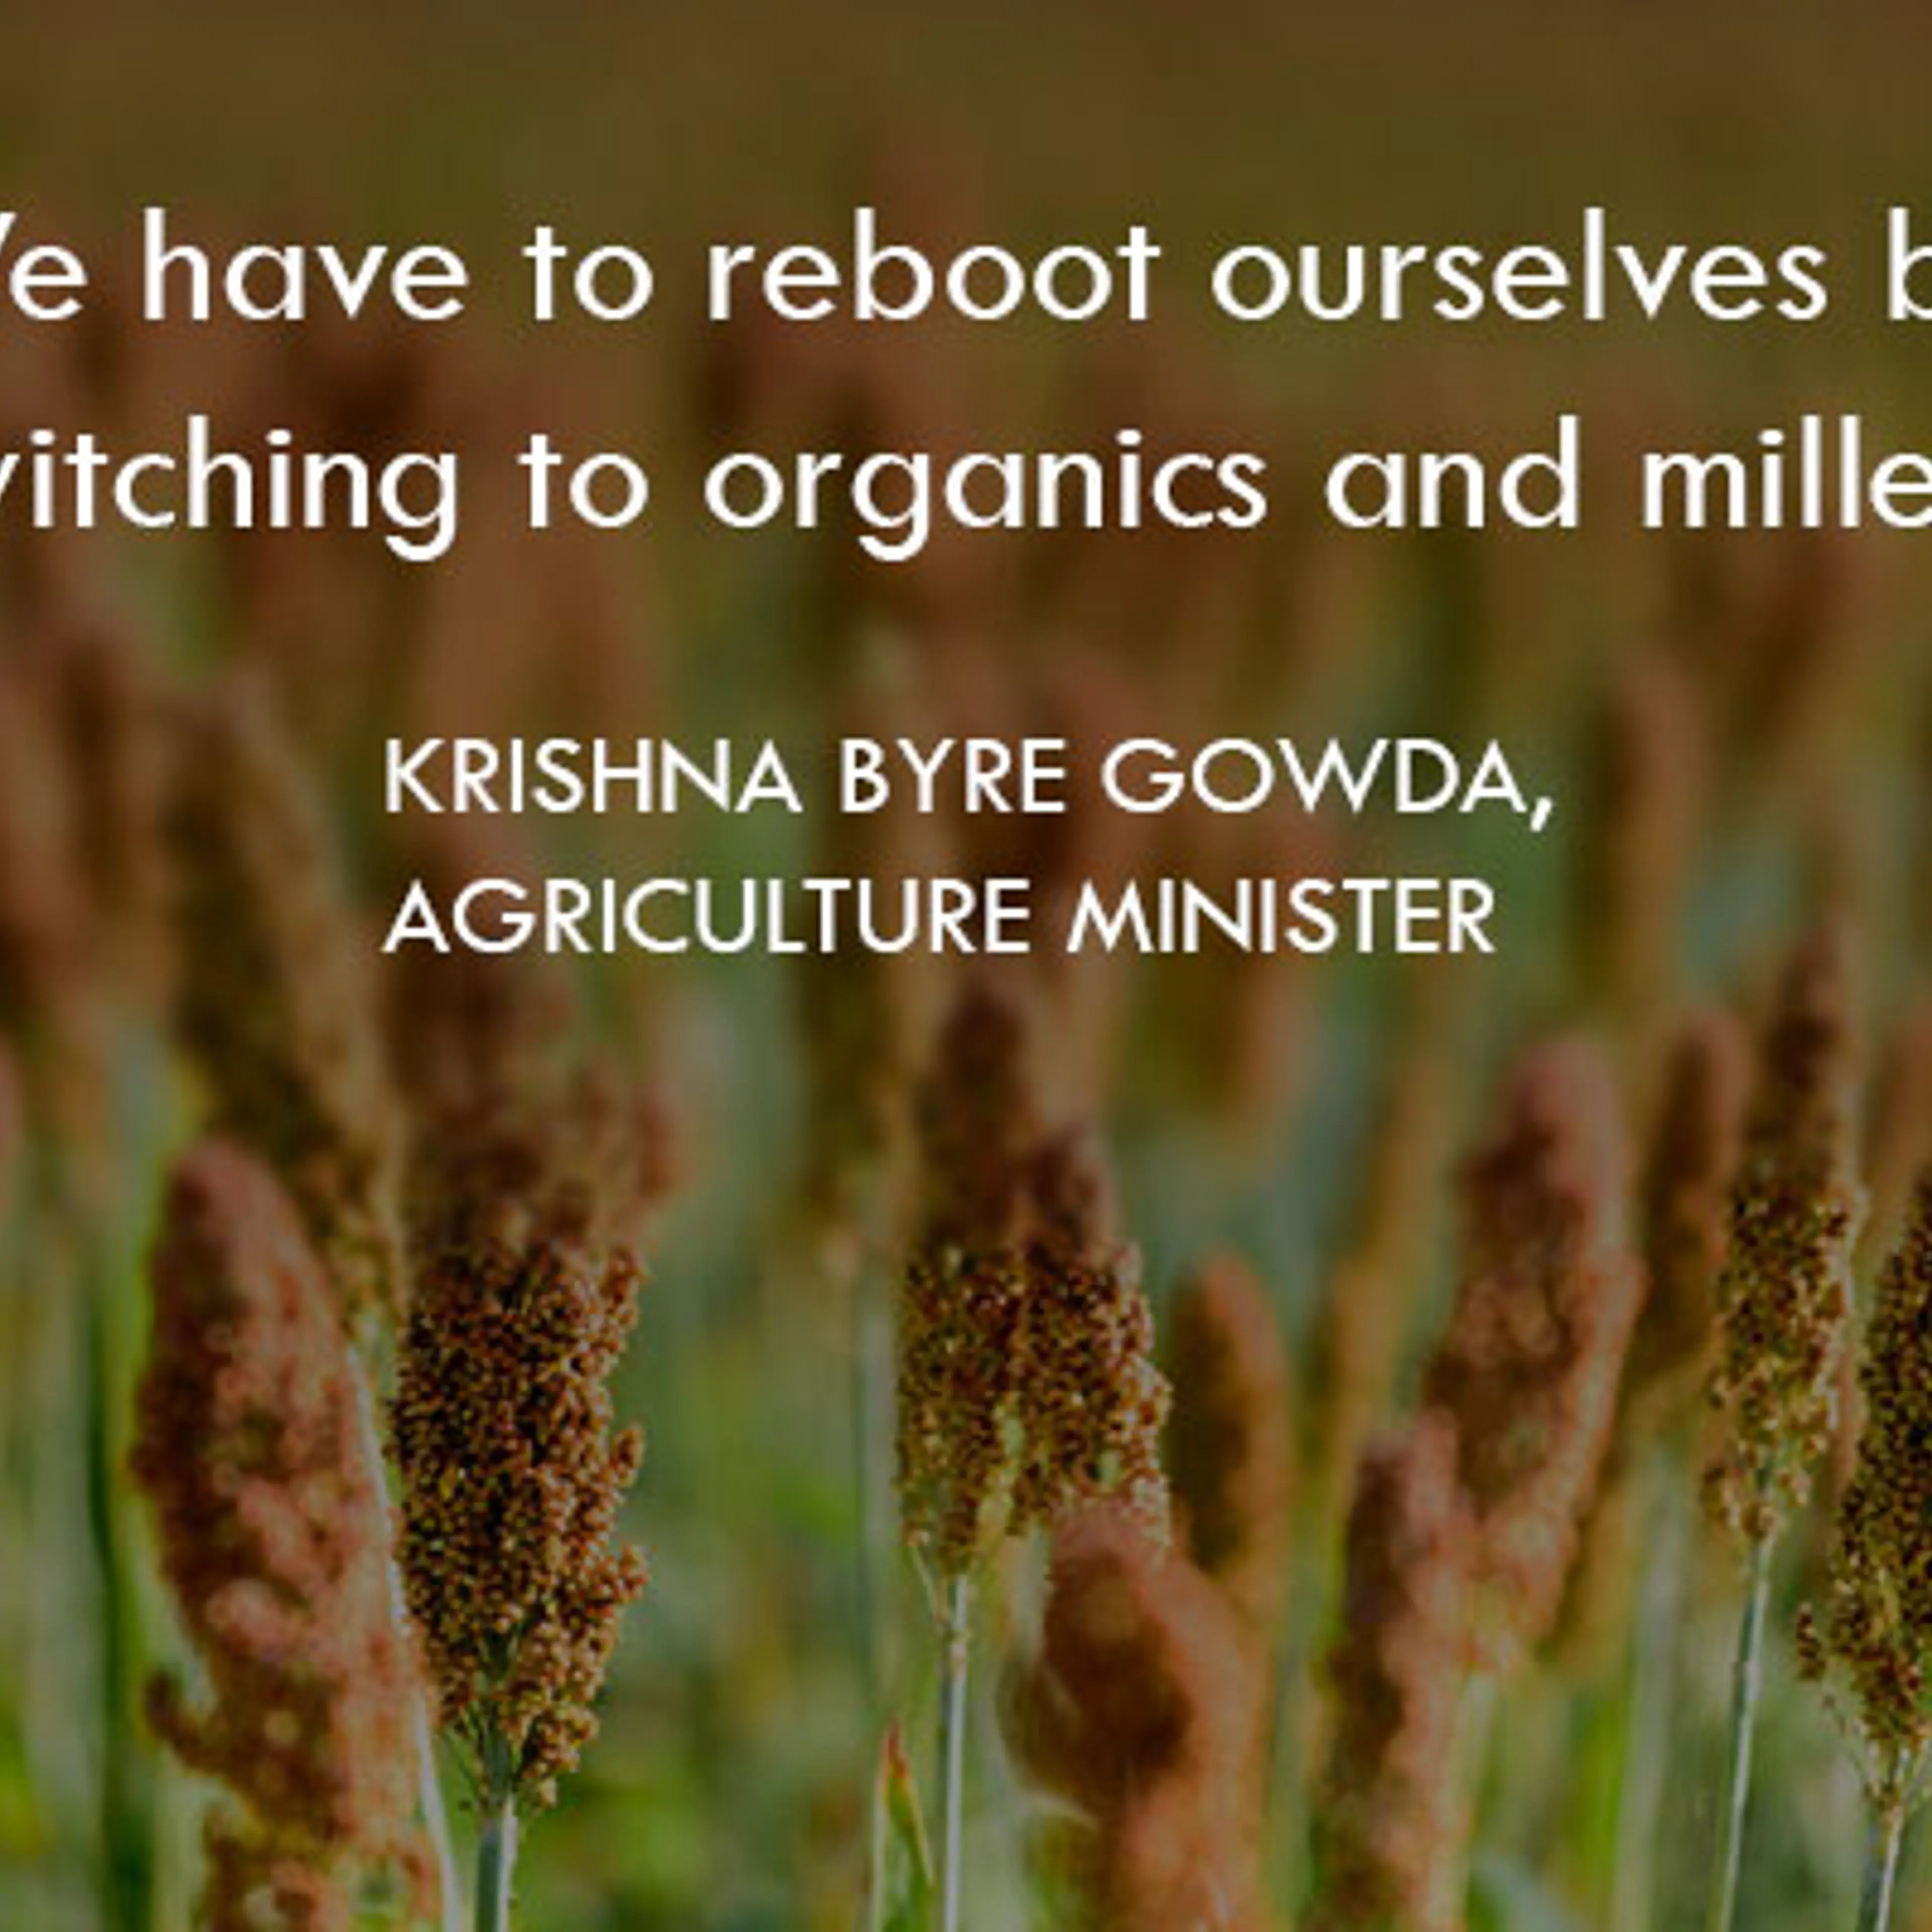 ‘We have to reboot ourselves by switching to organics and millets’ – 35 quotes from Indian startup journeys